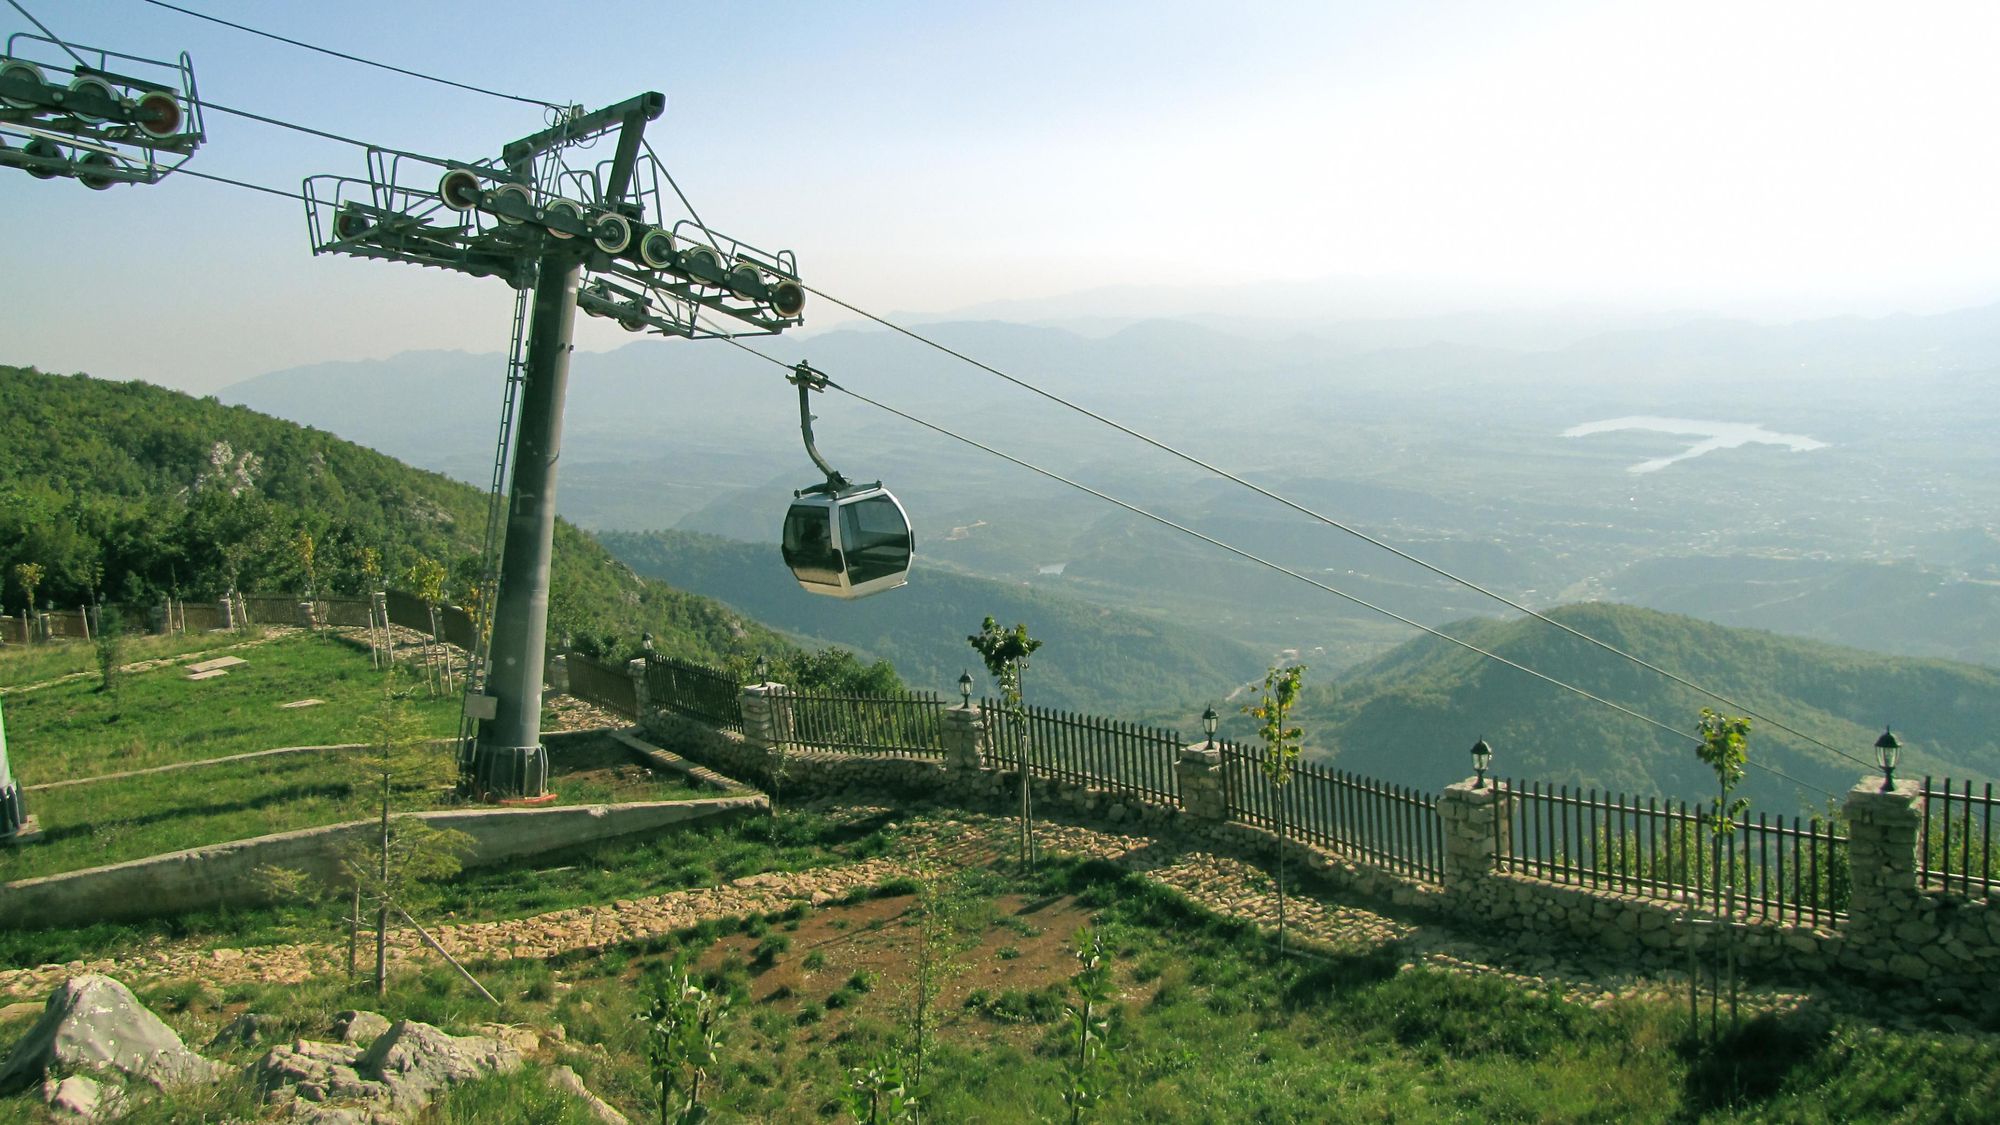 Dajti, standing at 1,613m (5,292ft) above Sea Level, is a mountain on the edge of Tirana, Albania. Photo: Getty